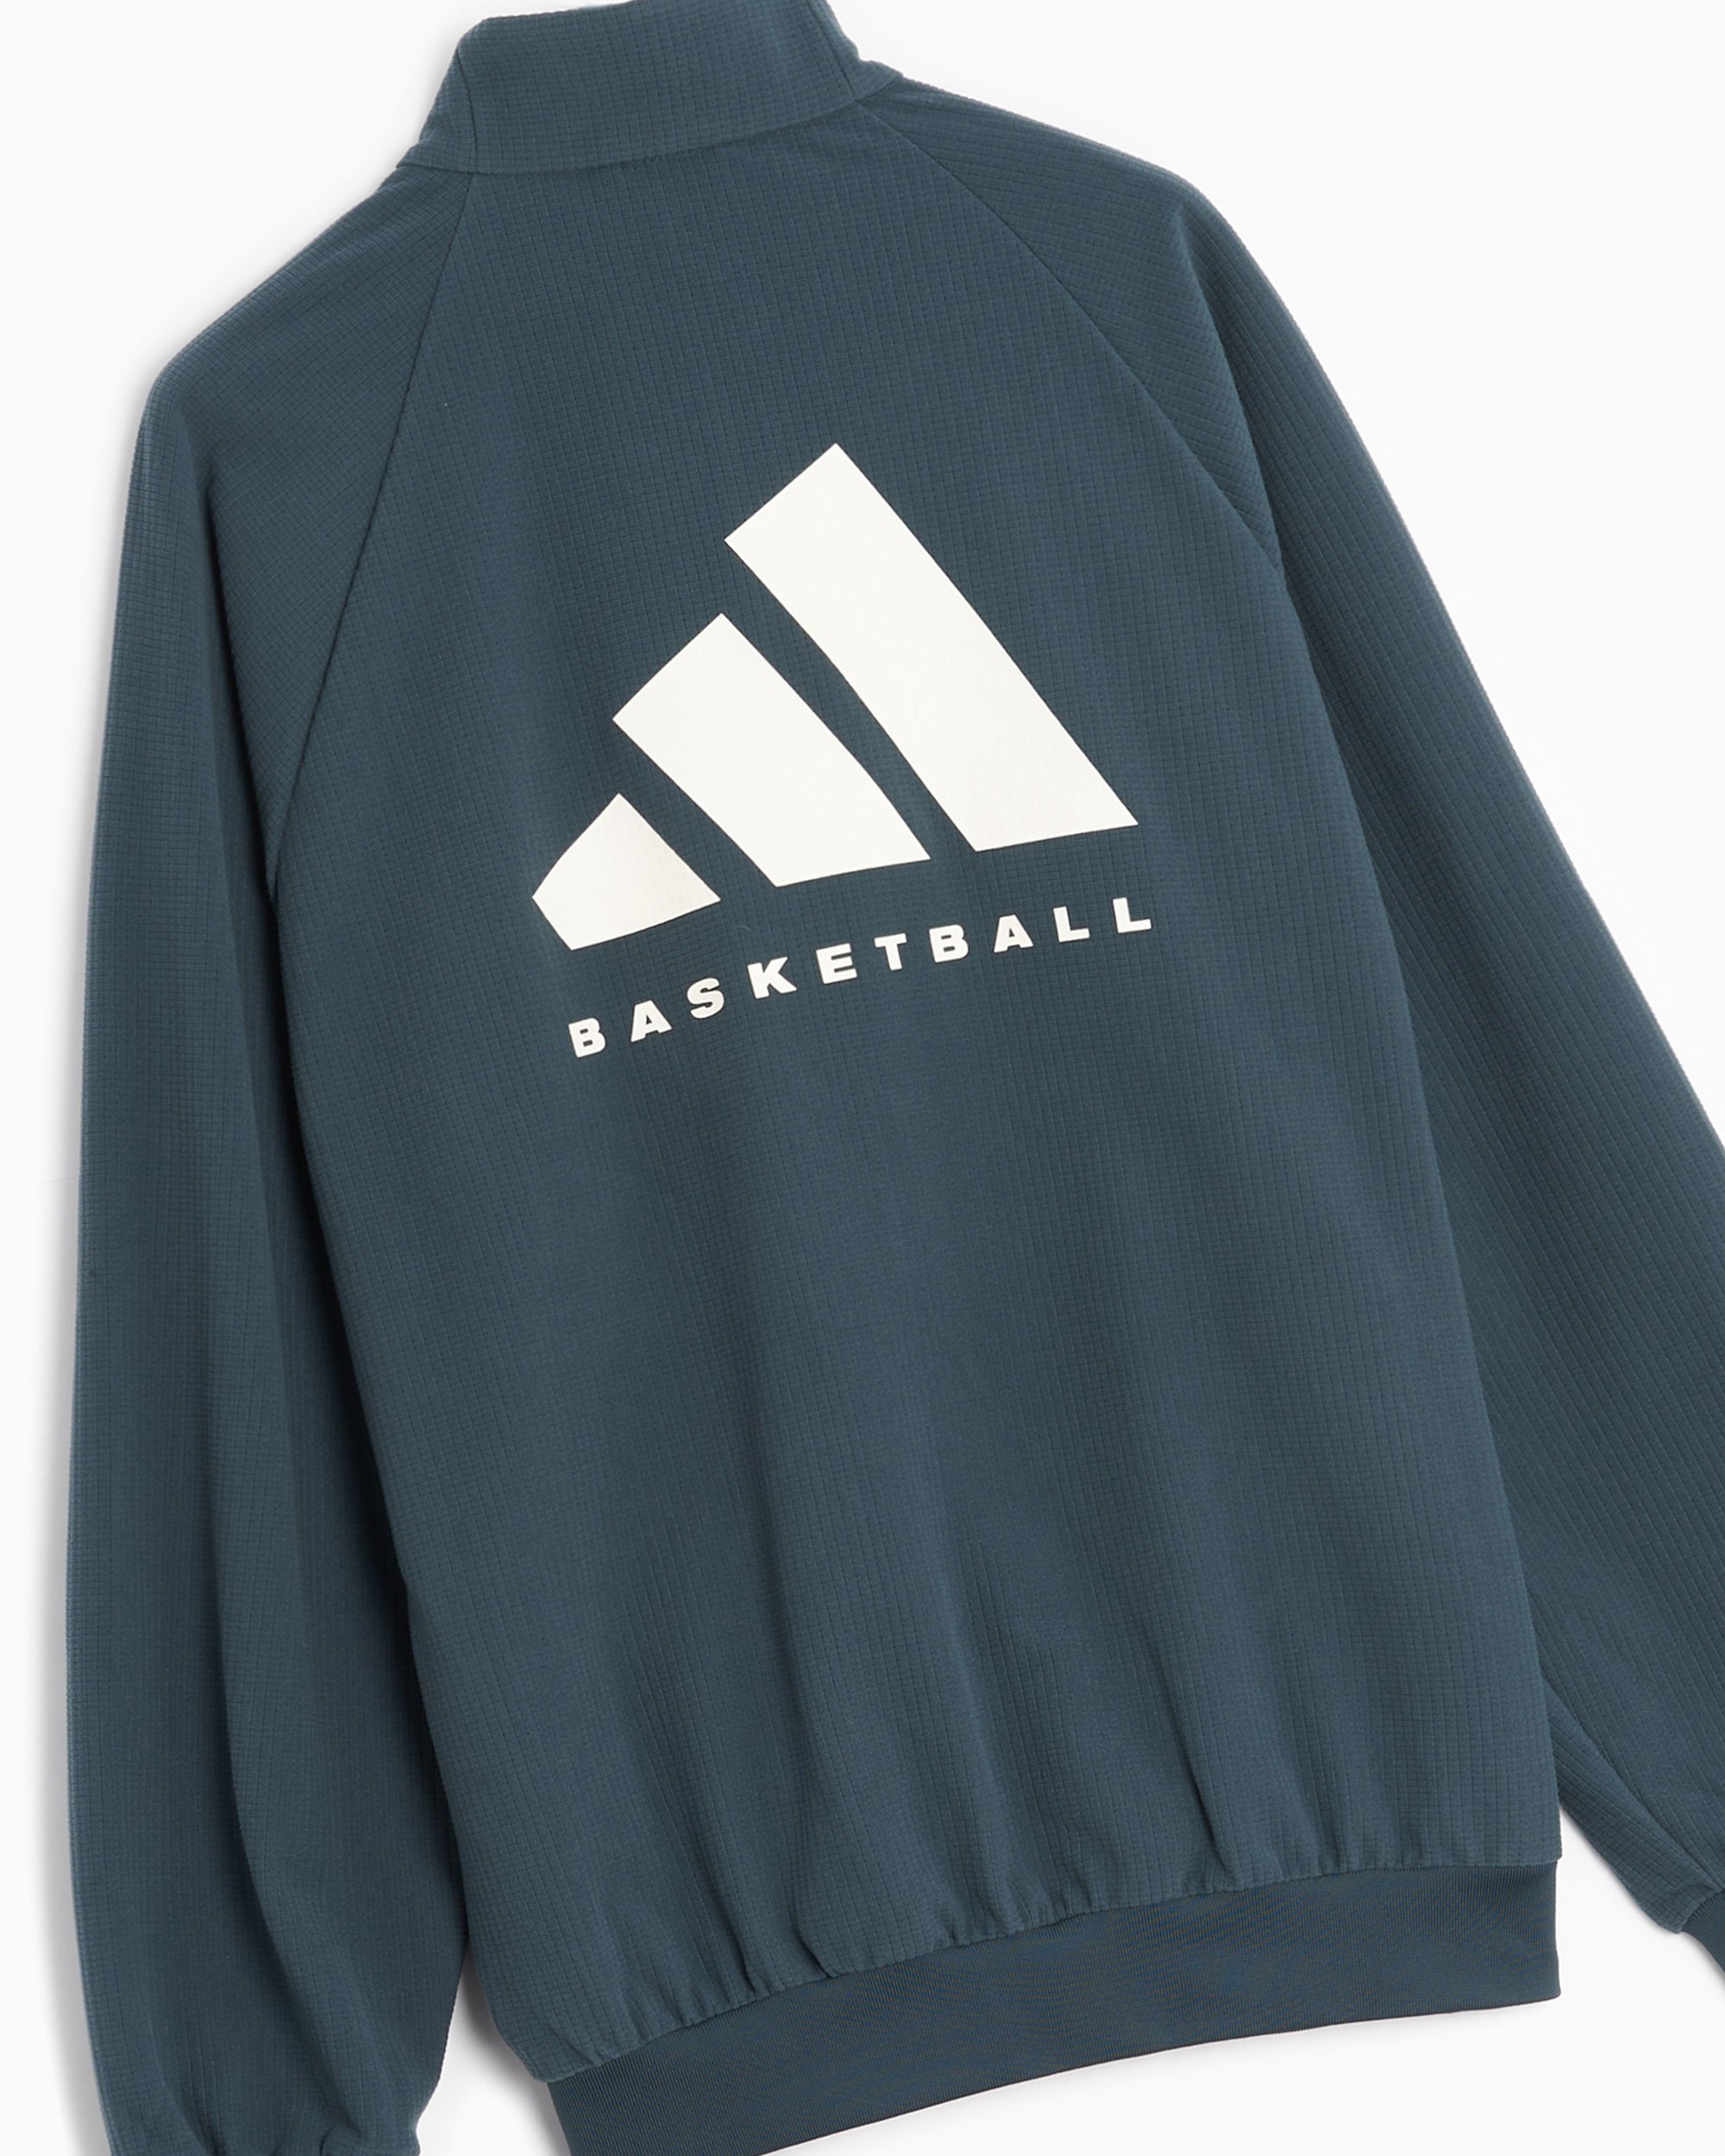 adidas Performance Jacket Online Buy FOOTDISTRICT Green IT2470| Track at One Unisex Basketball